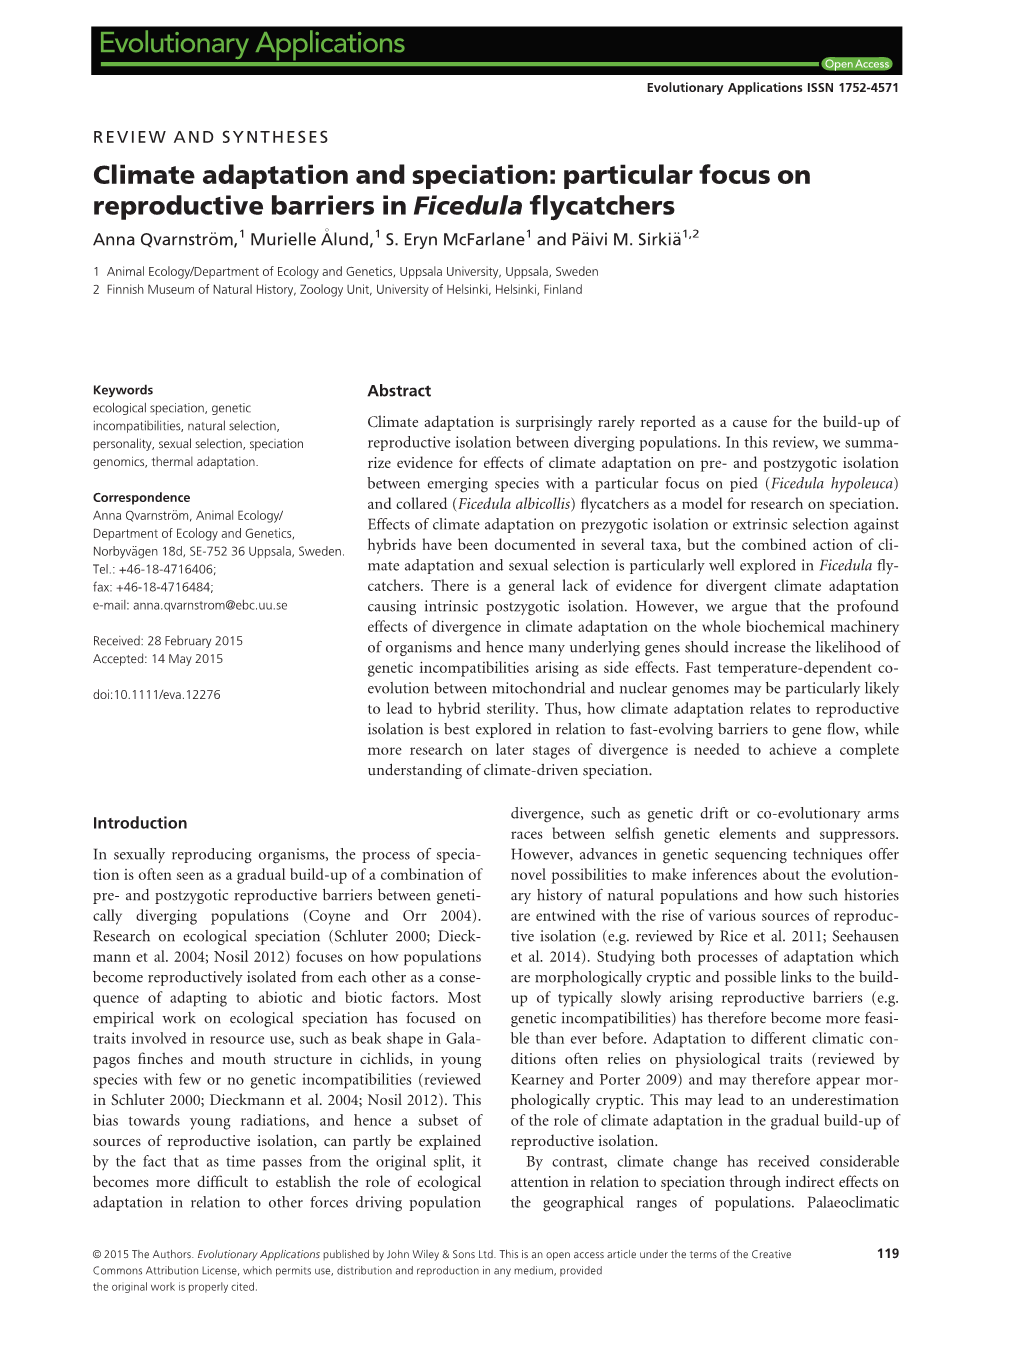 Particular Focus on Reproductive Barriers in Ficedula Flycatchers